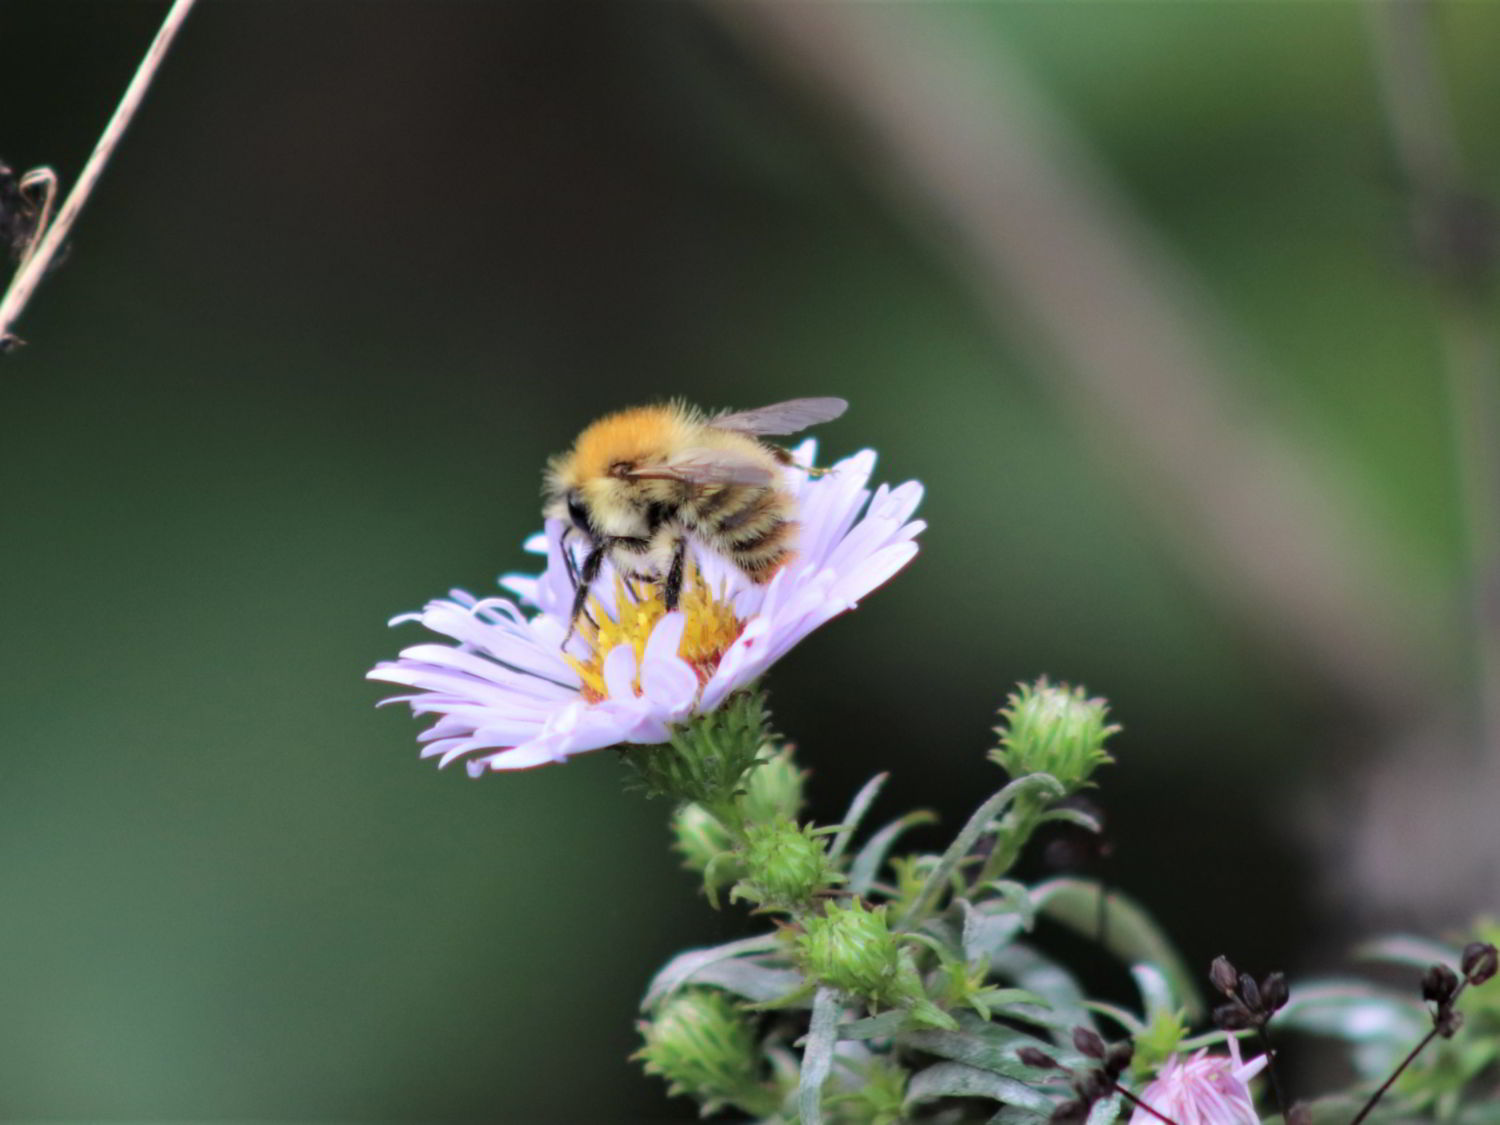 Brown-banded Carder Bee feeding on a flower